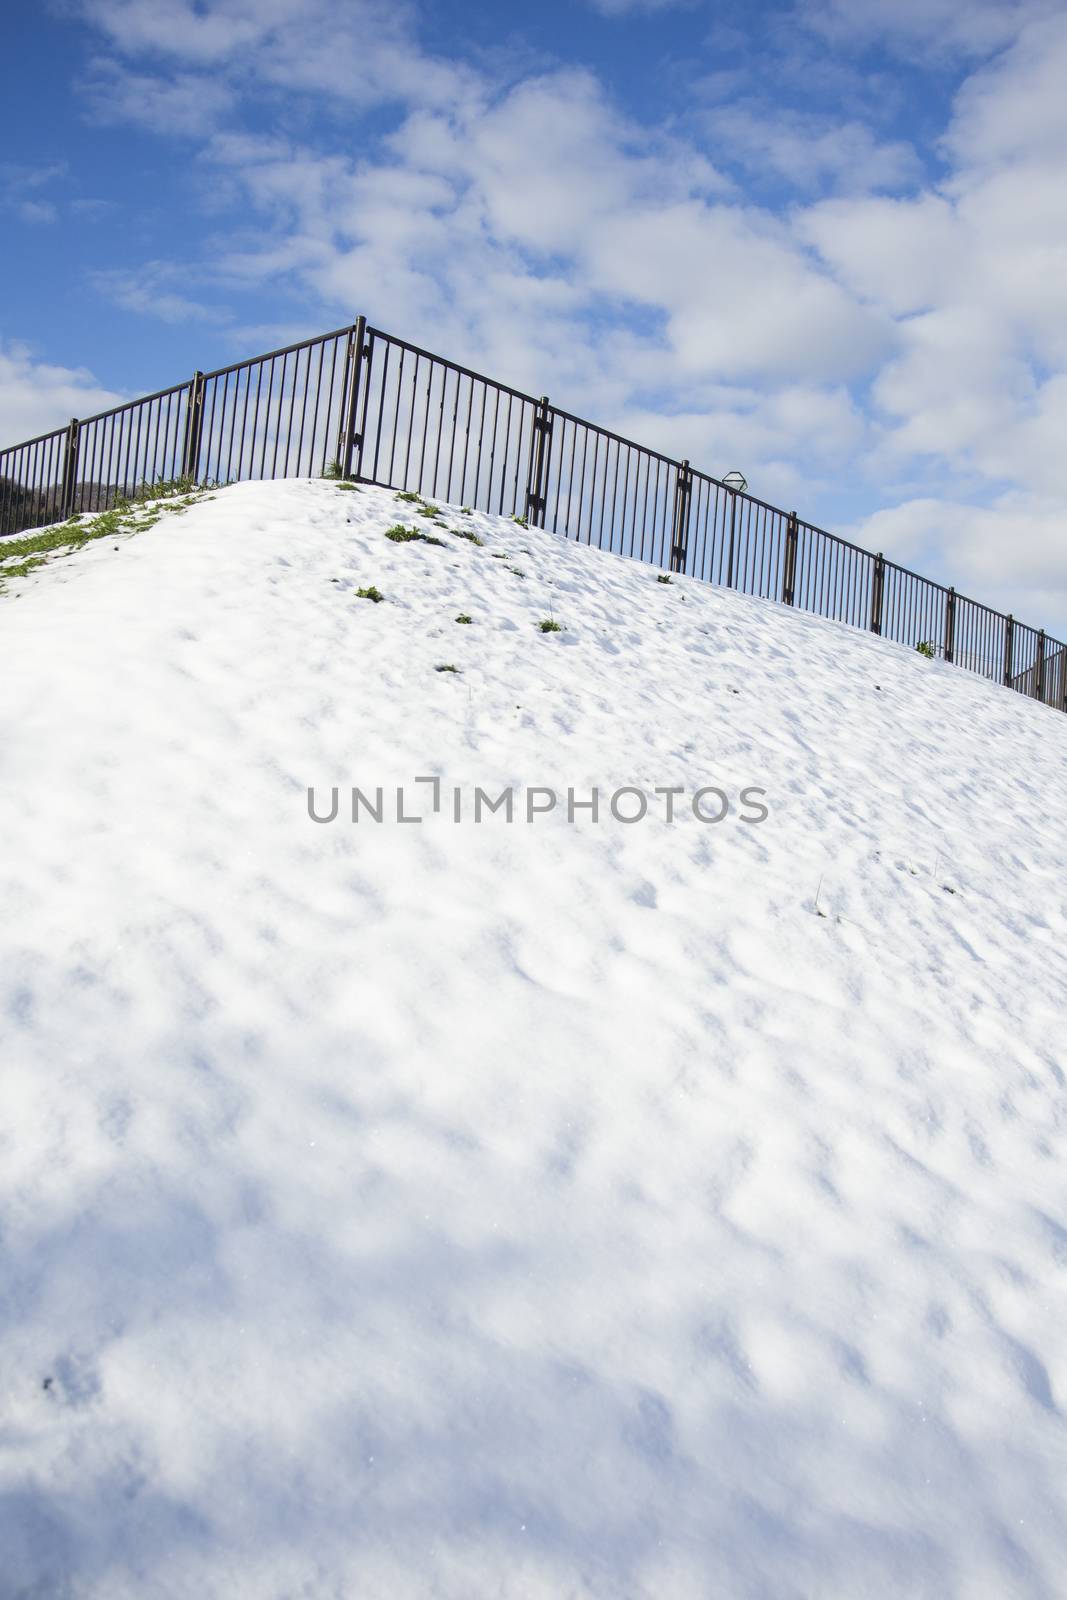 Stairway in park winter season with snow by 2nix